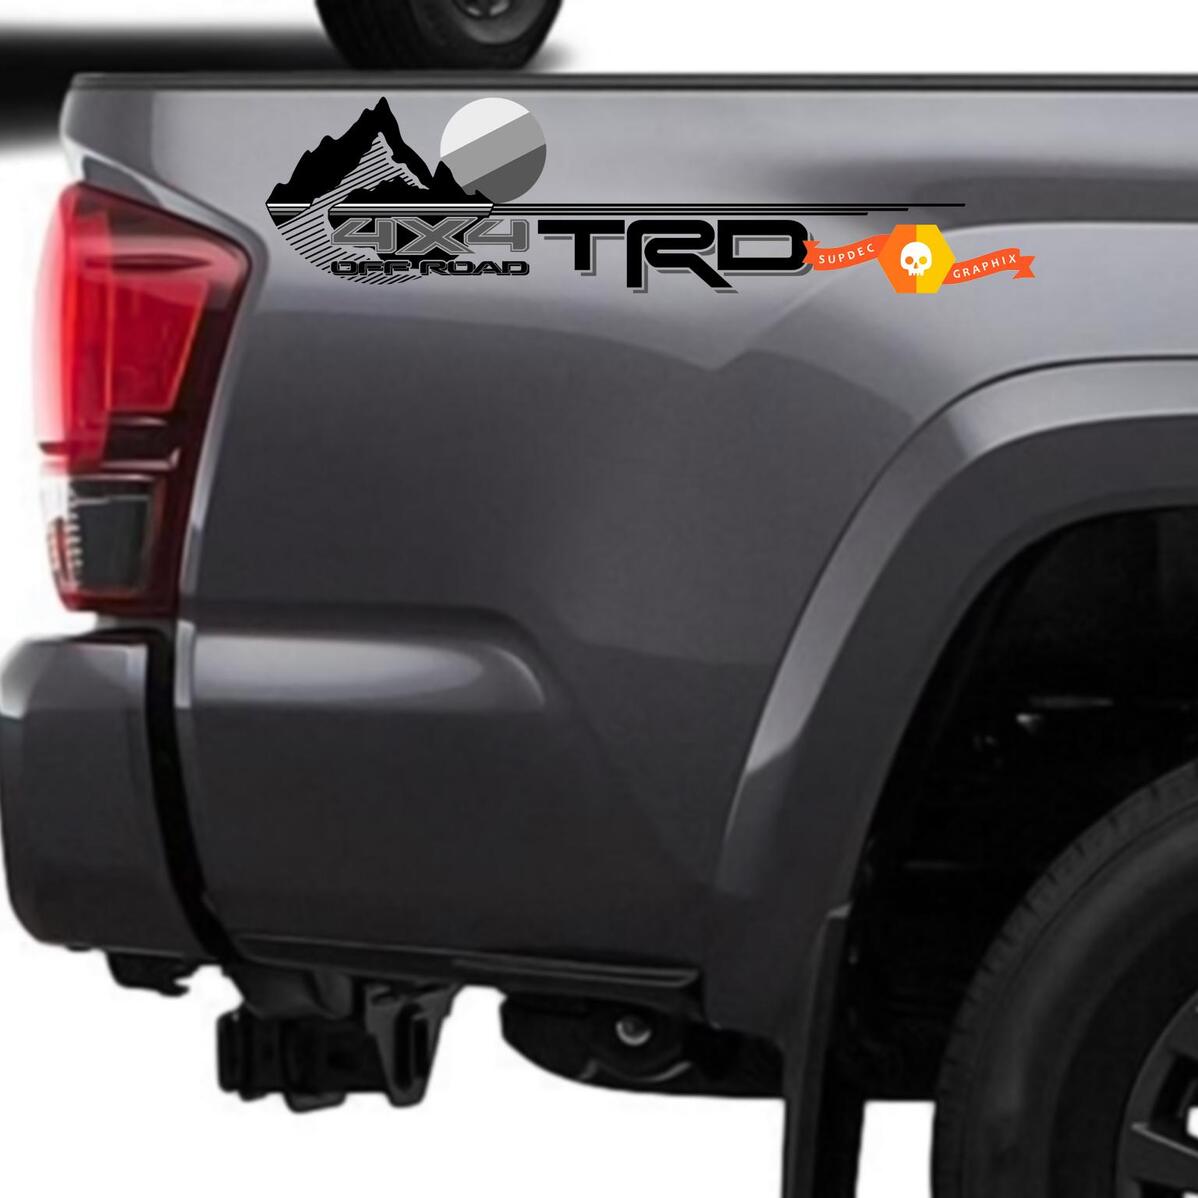 2 TOYOTA TRD SPORT Decals Vinyl Stickers 1 PAIR truck bed Tacoma Tundra 4 Runner